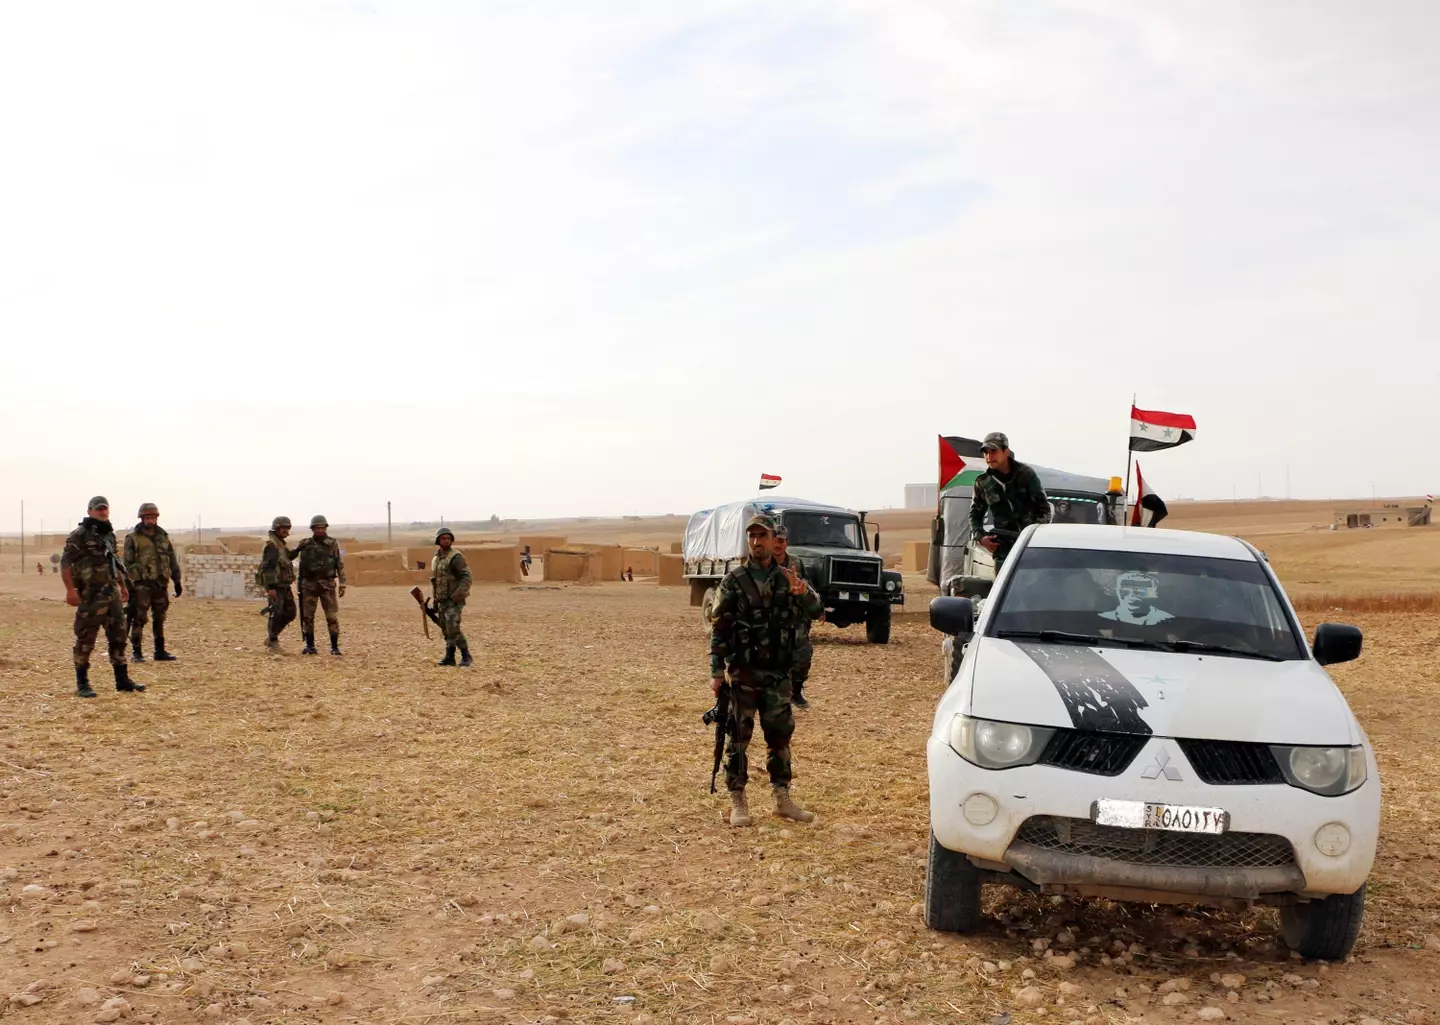 Syrian soldiers in the northern countryside of Hasakah province.